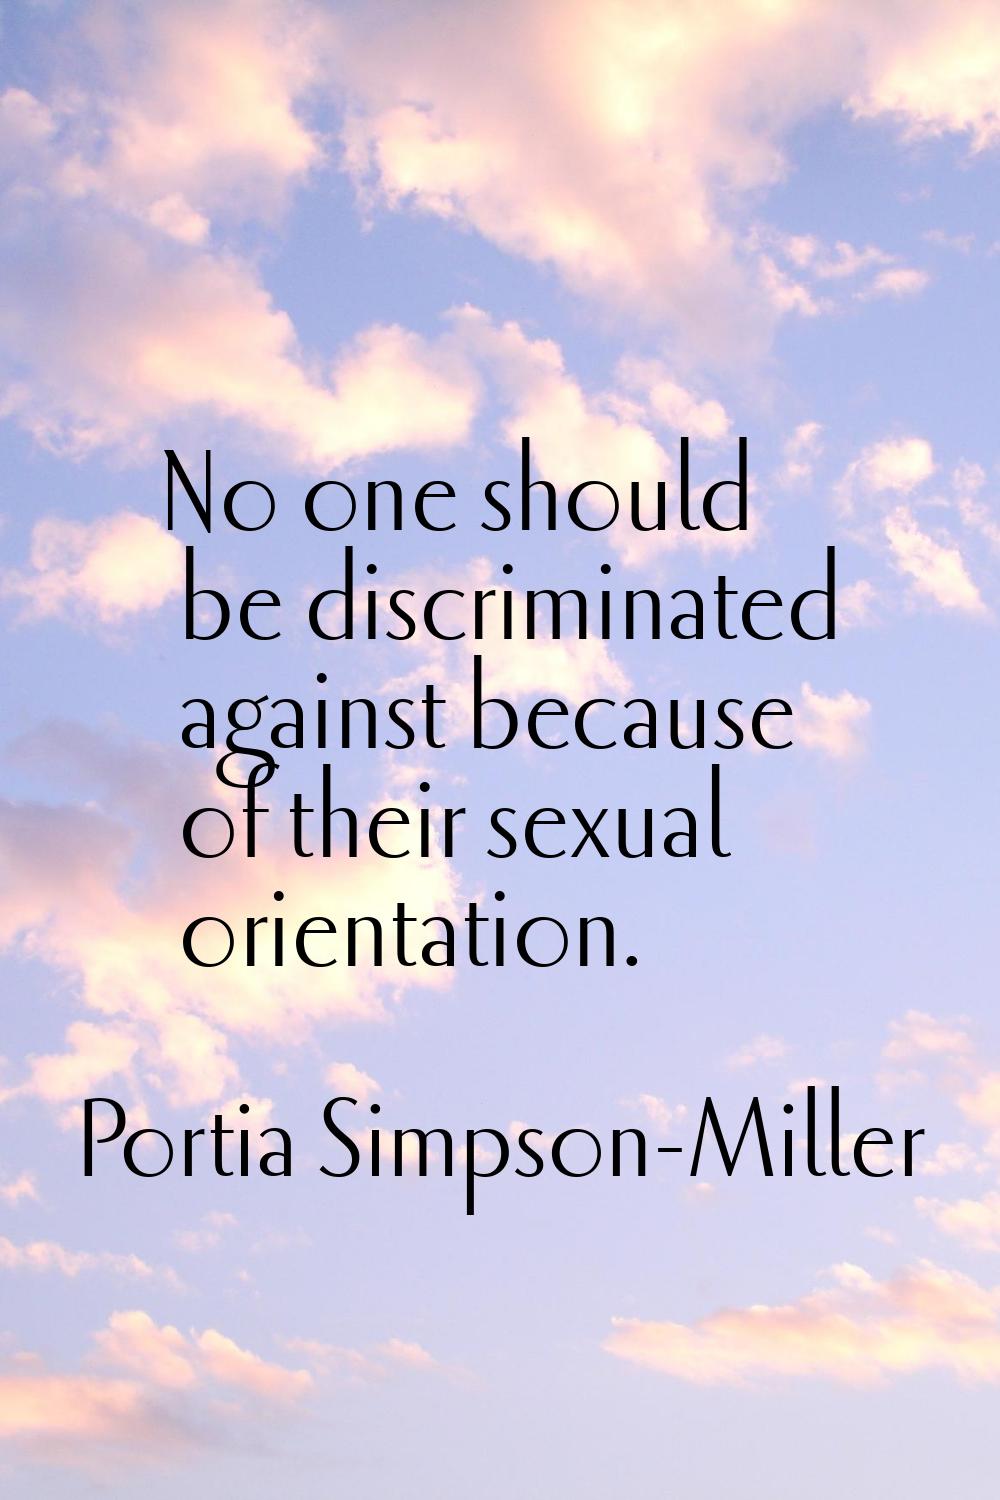 No one should be discriminated against because of their sexual orientation.